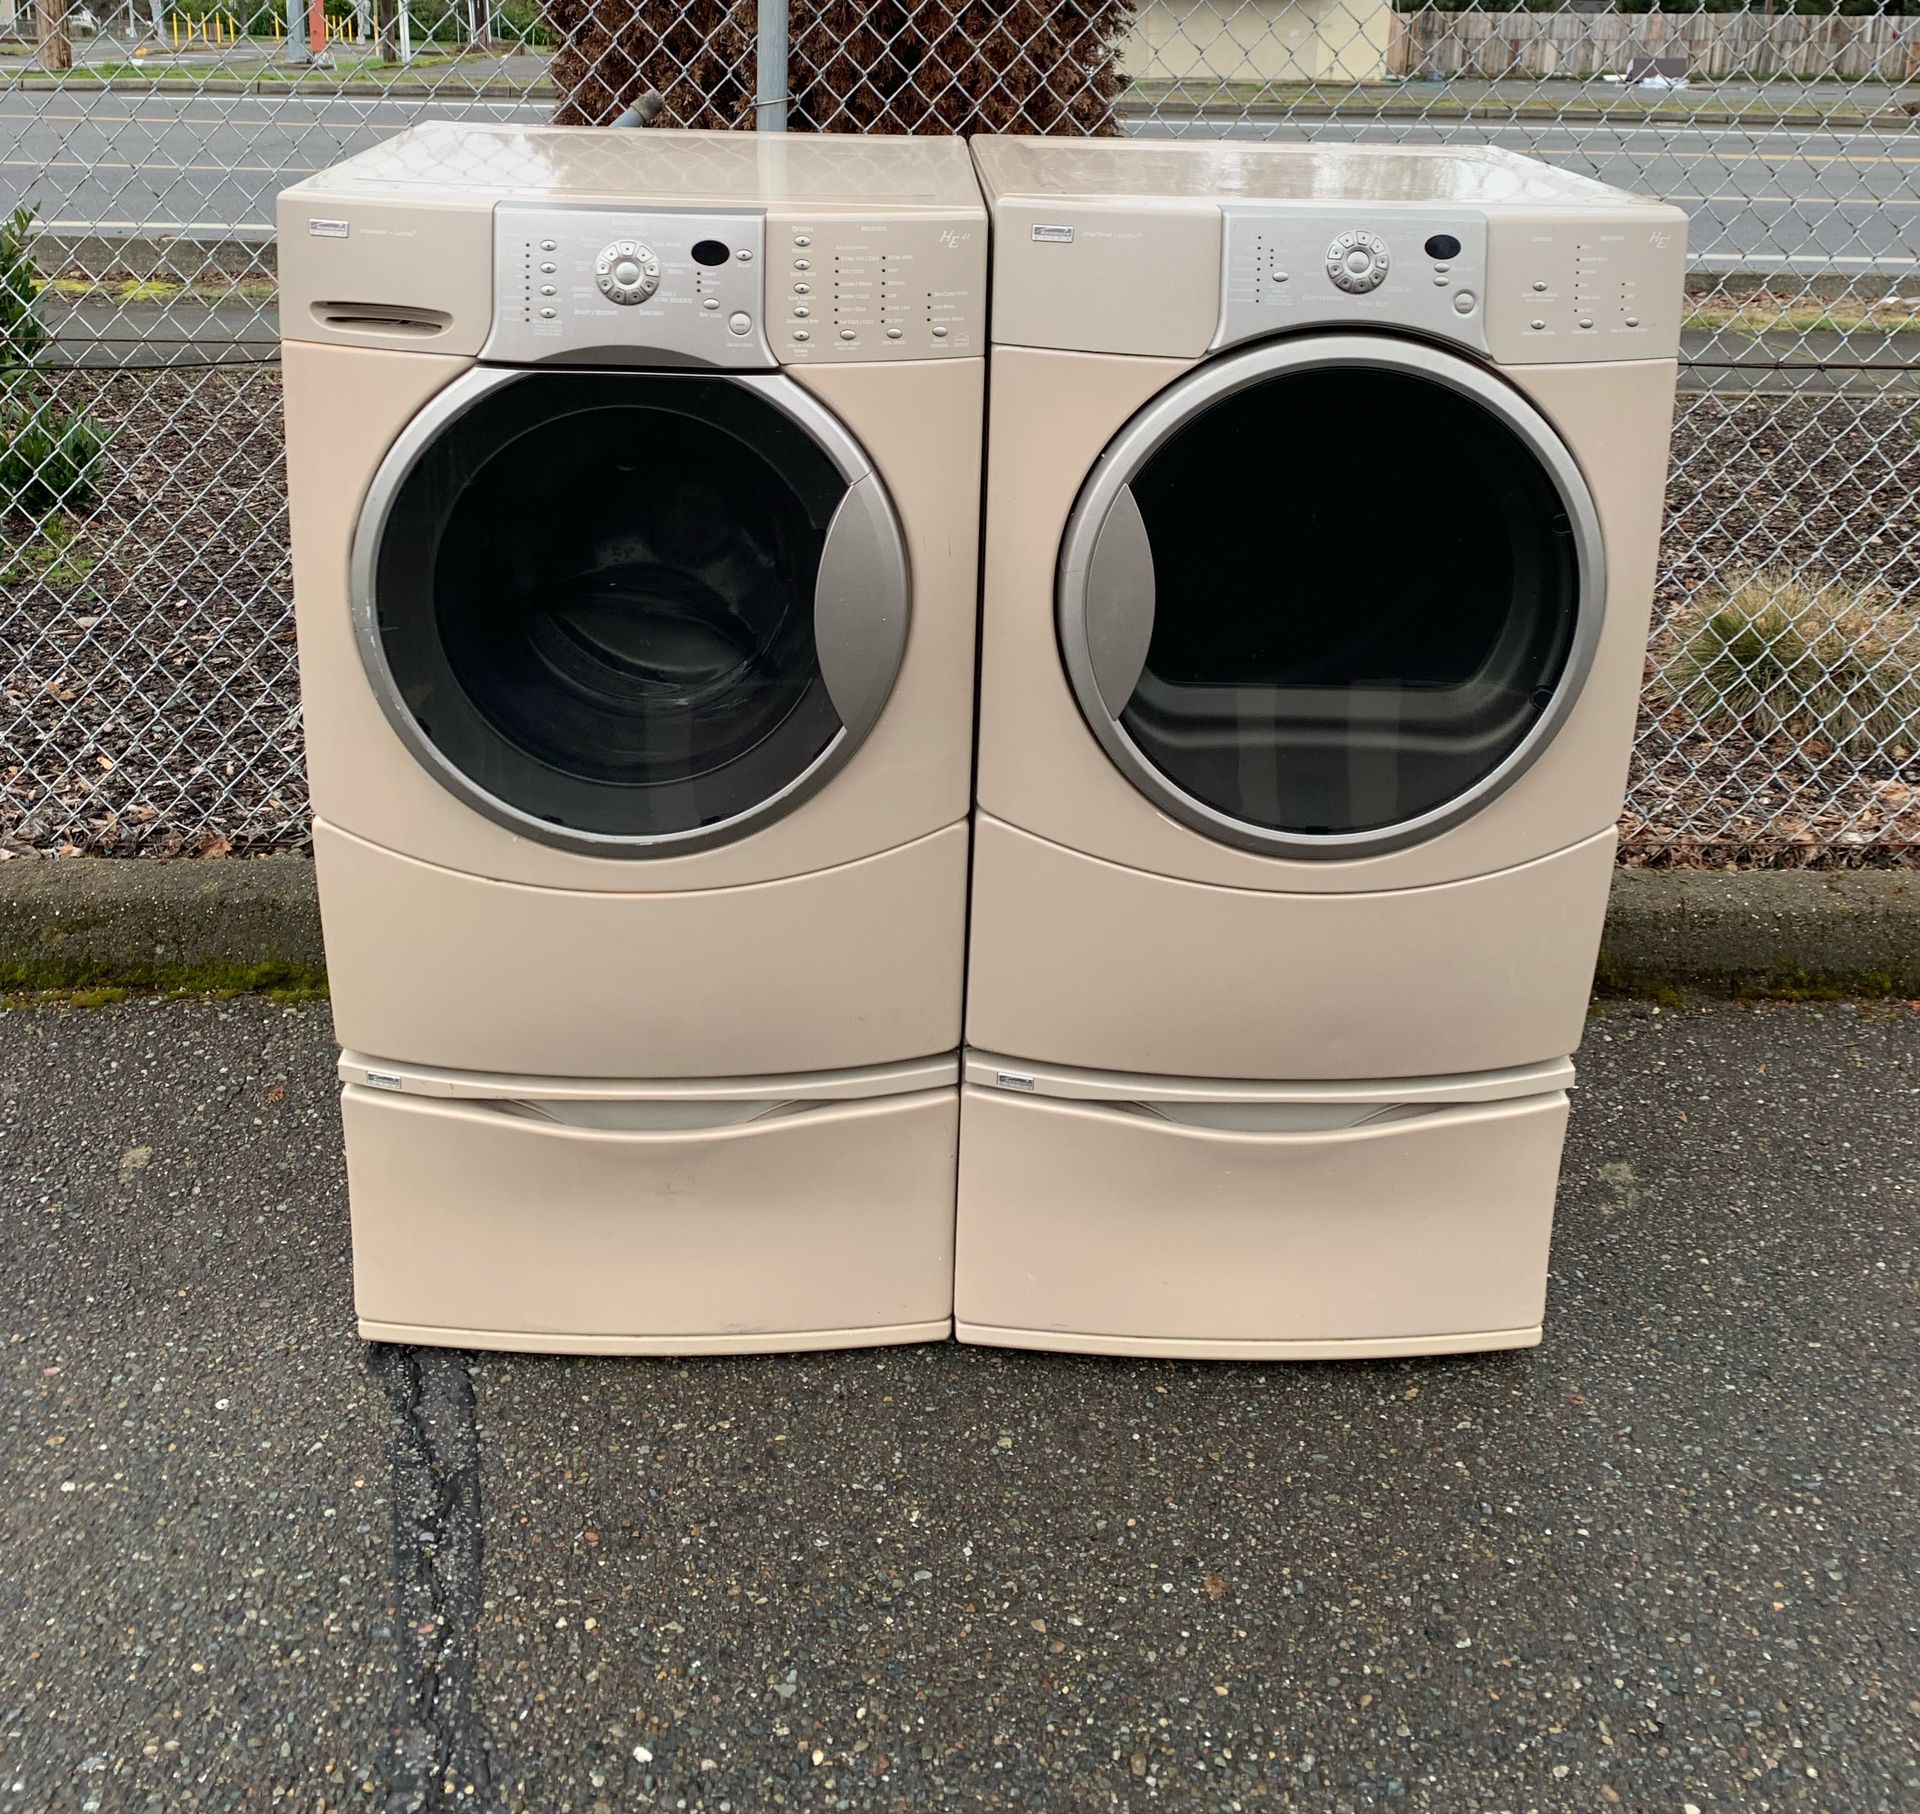 KENMORE WASHER AND DRYER.